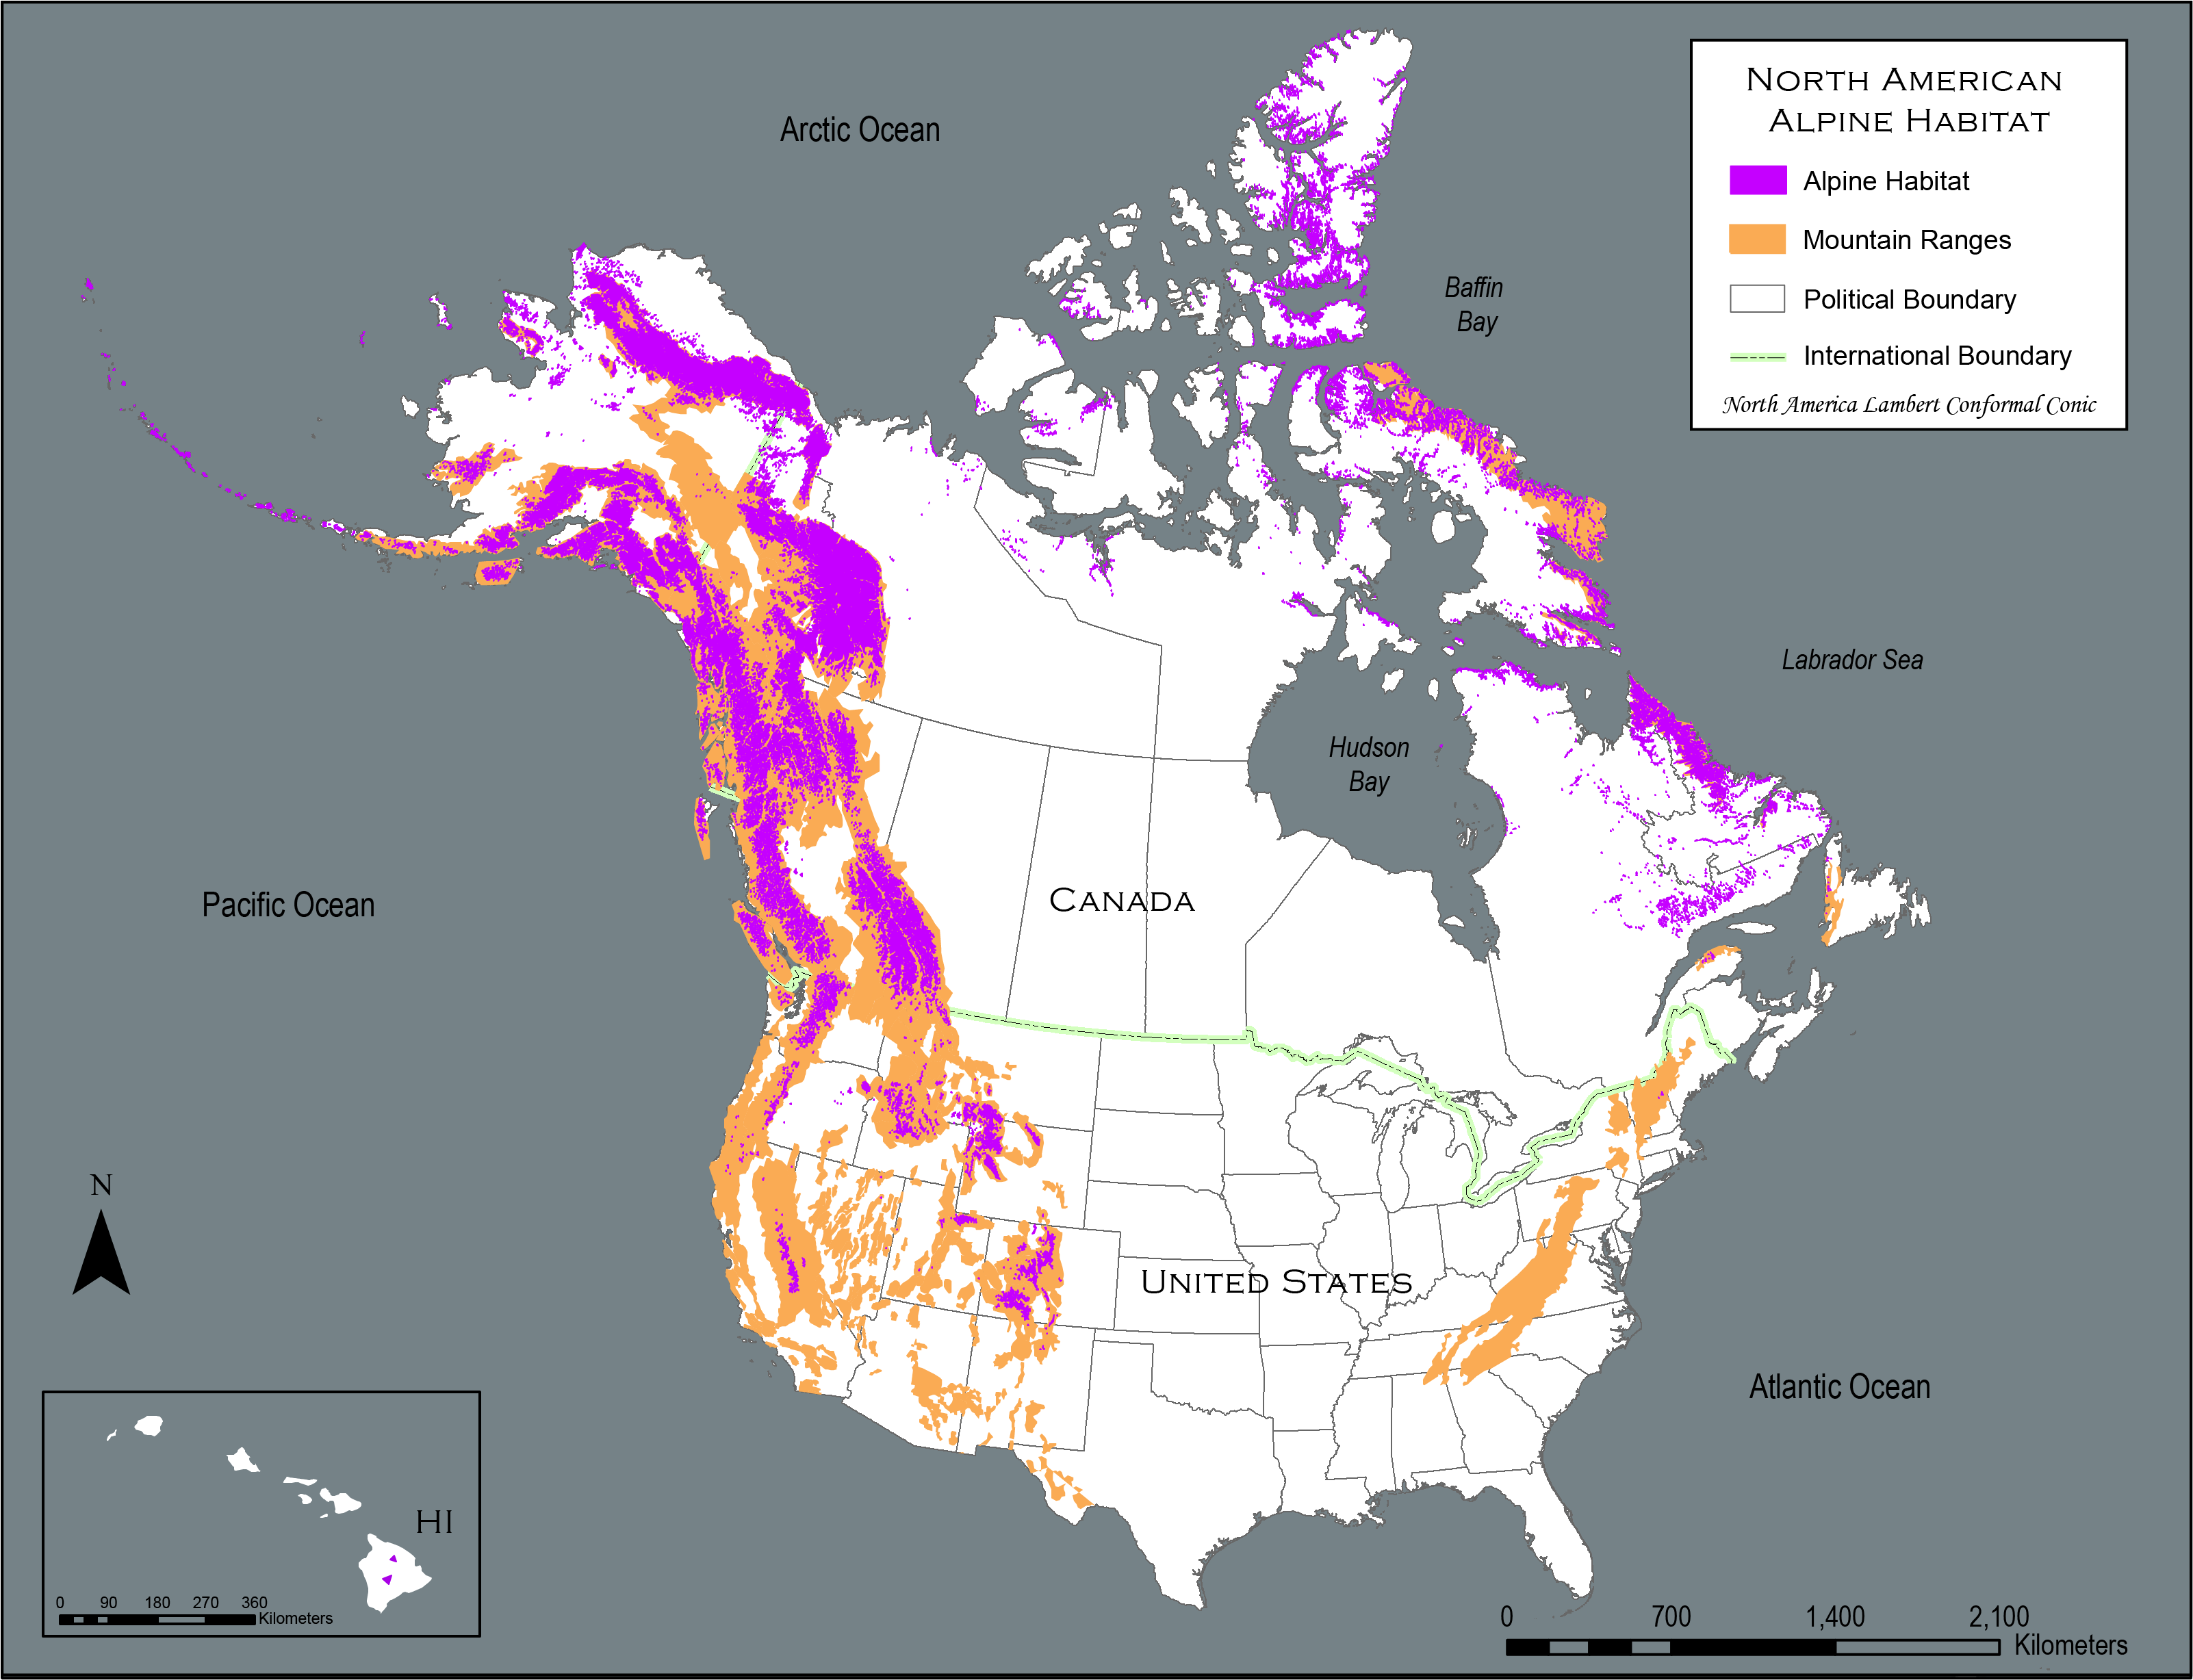 A colorful map highlighting North American Alpine Areas